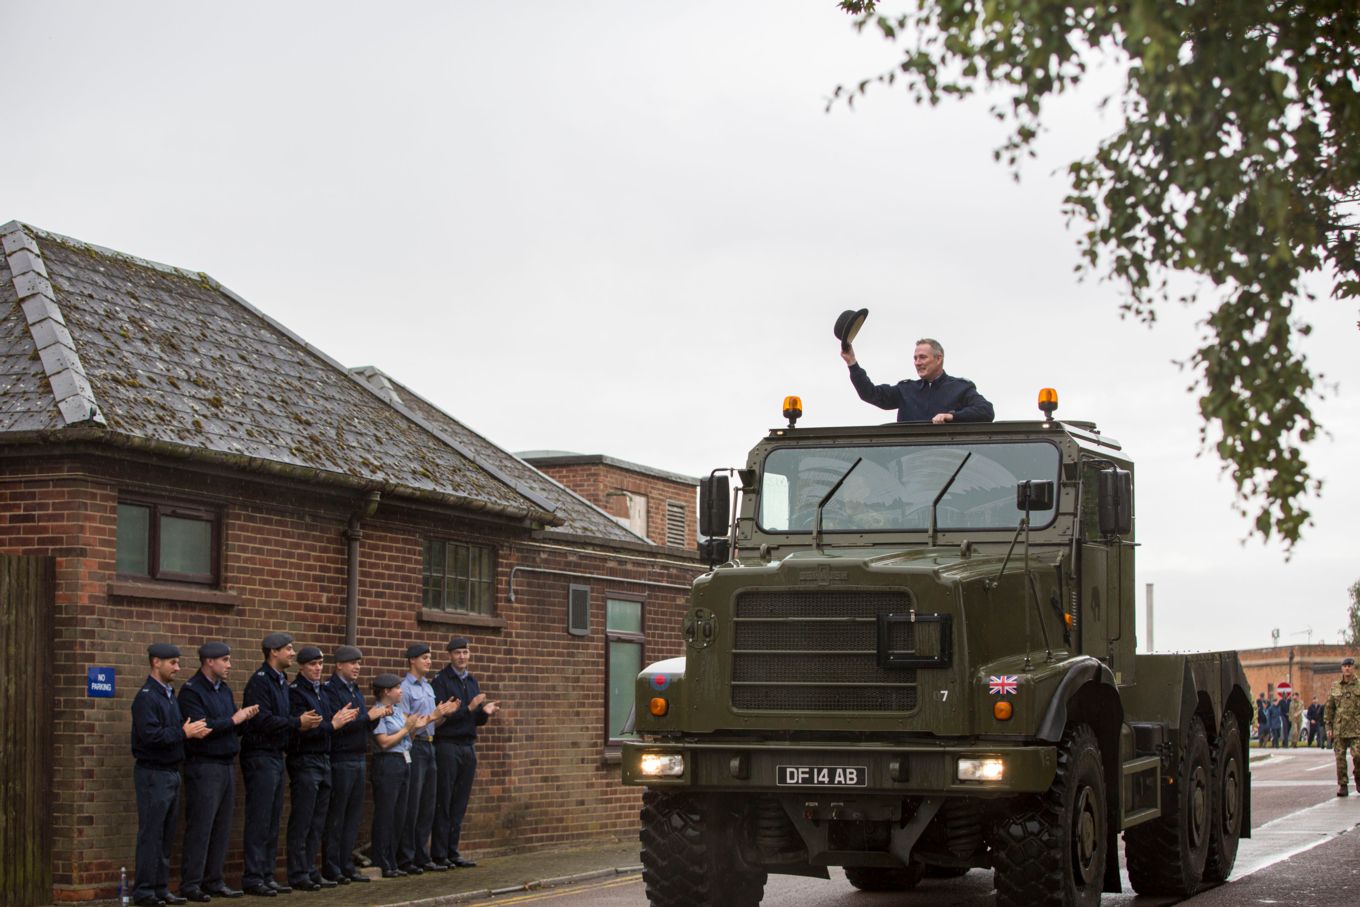 As is traditional at RAF Wittering, retiring Warrant Officers are driven from the Station in an Oshkosh truck.